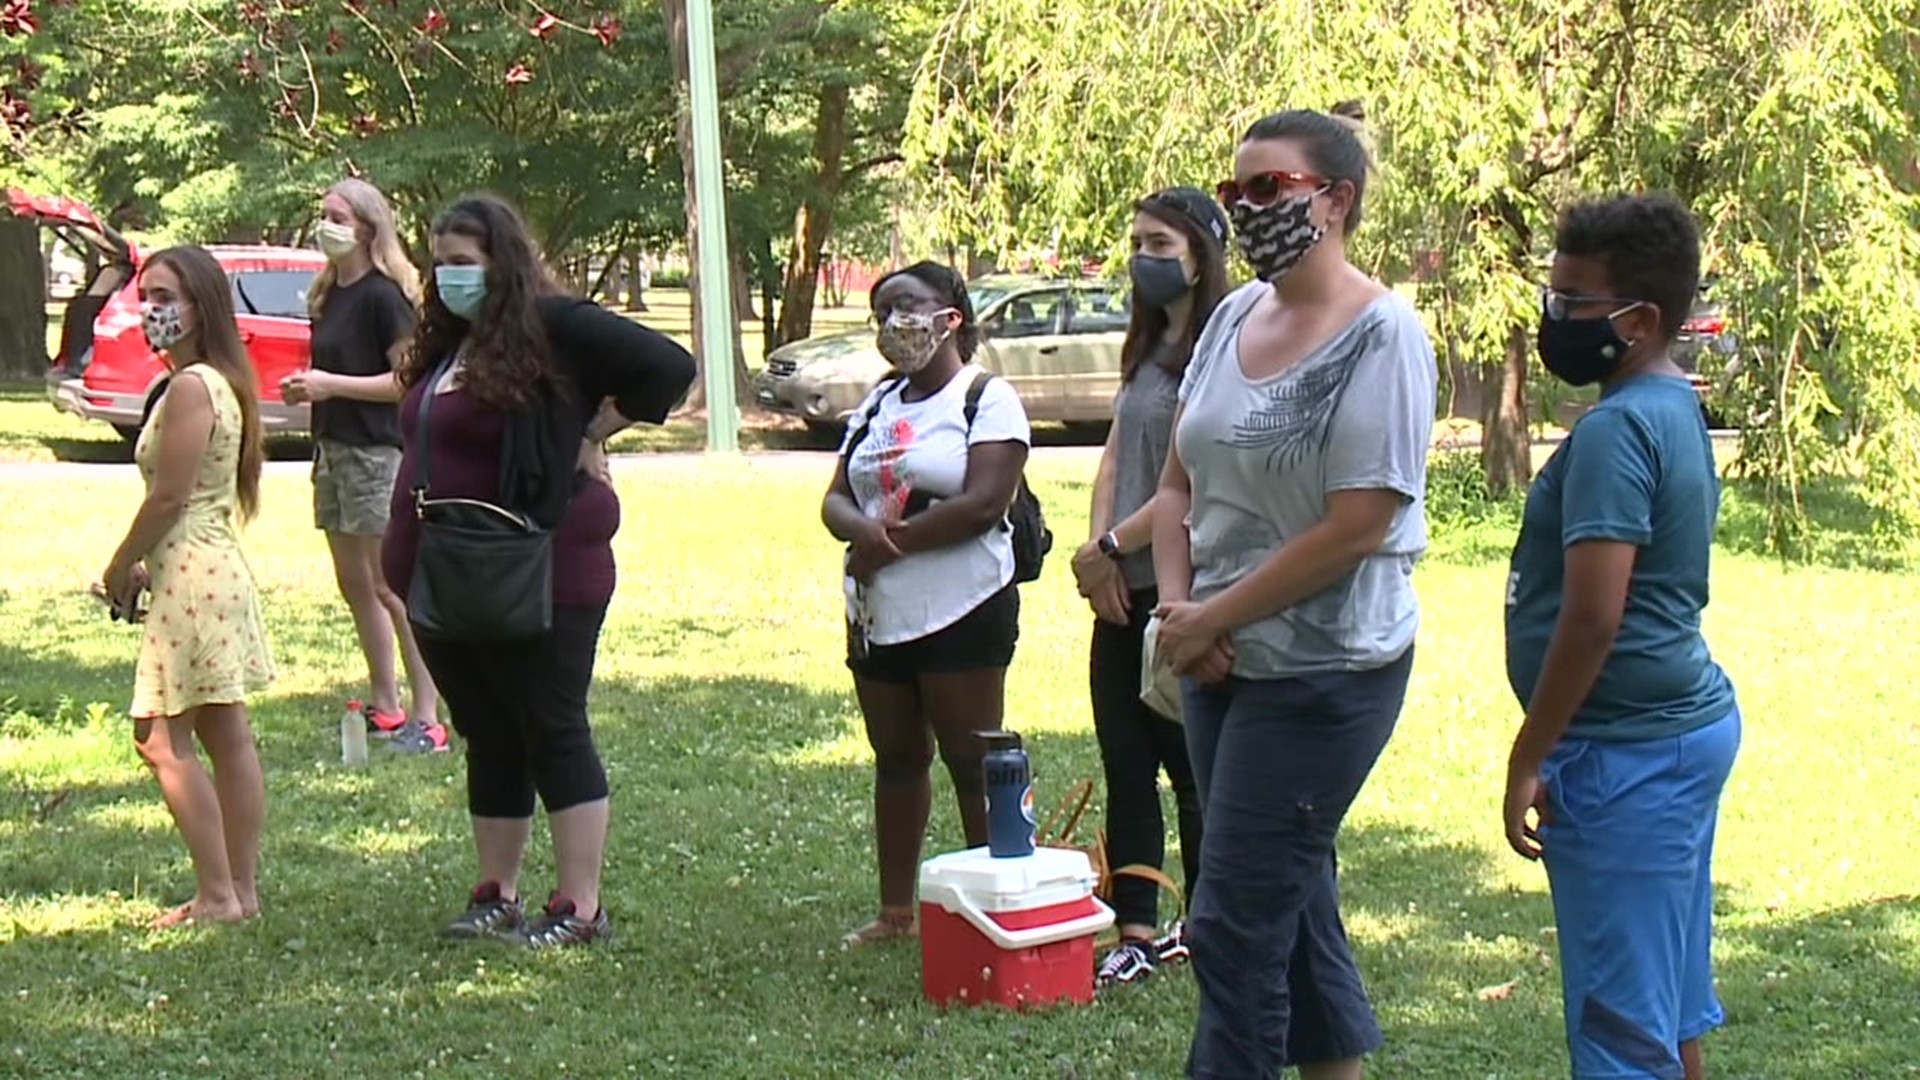 Speakers denounced the actions of Neo-Nazi marchers who marched in Brandon Park the day prior.